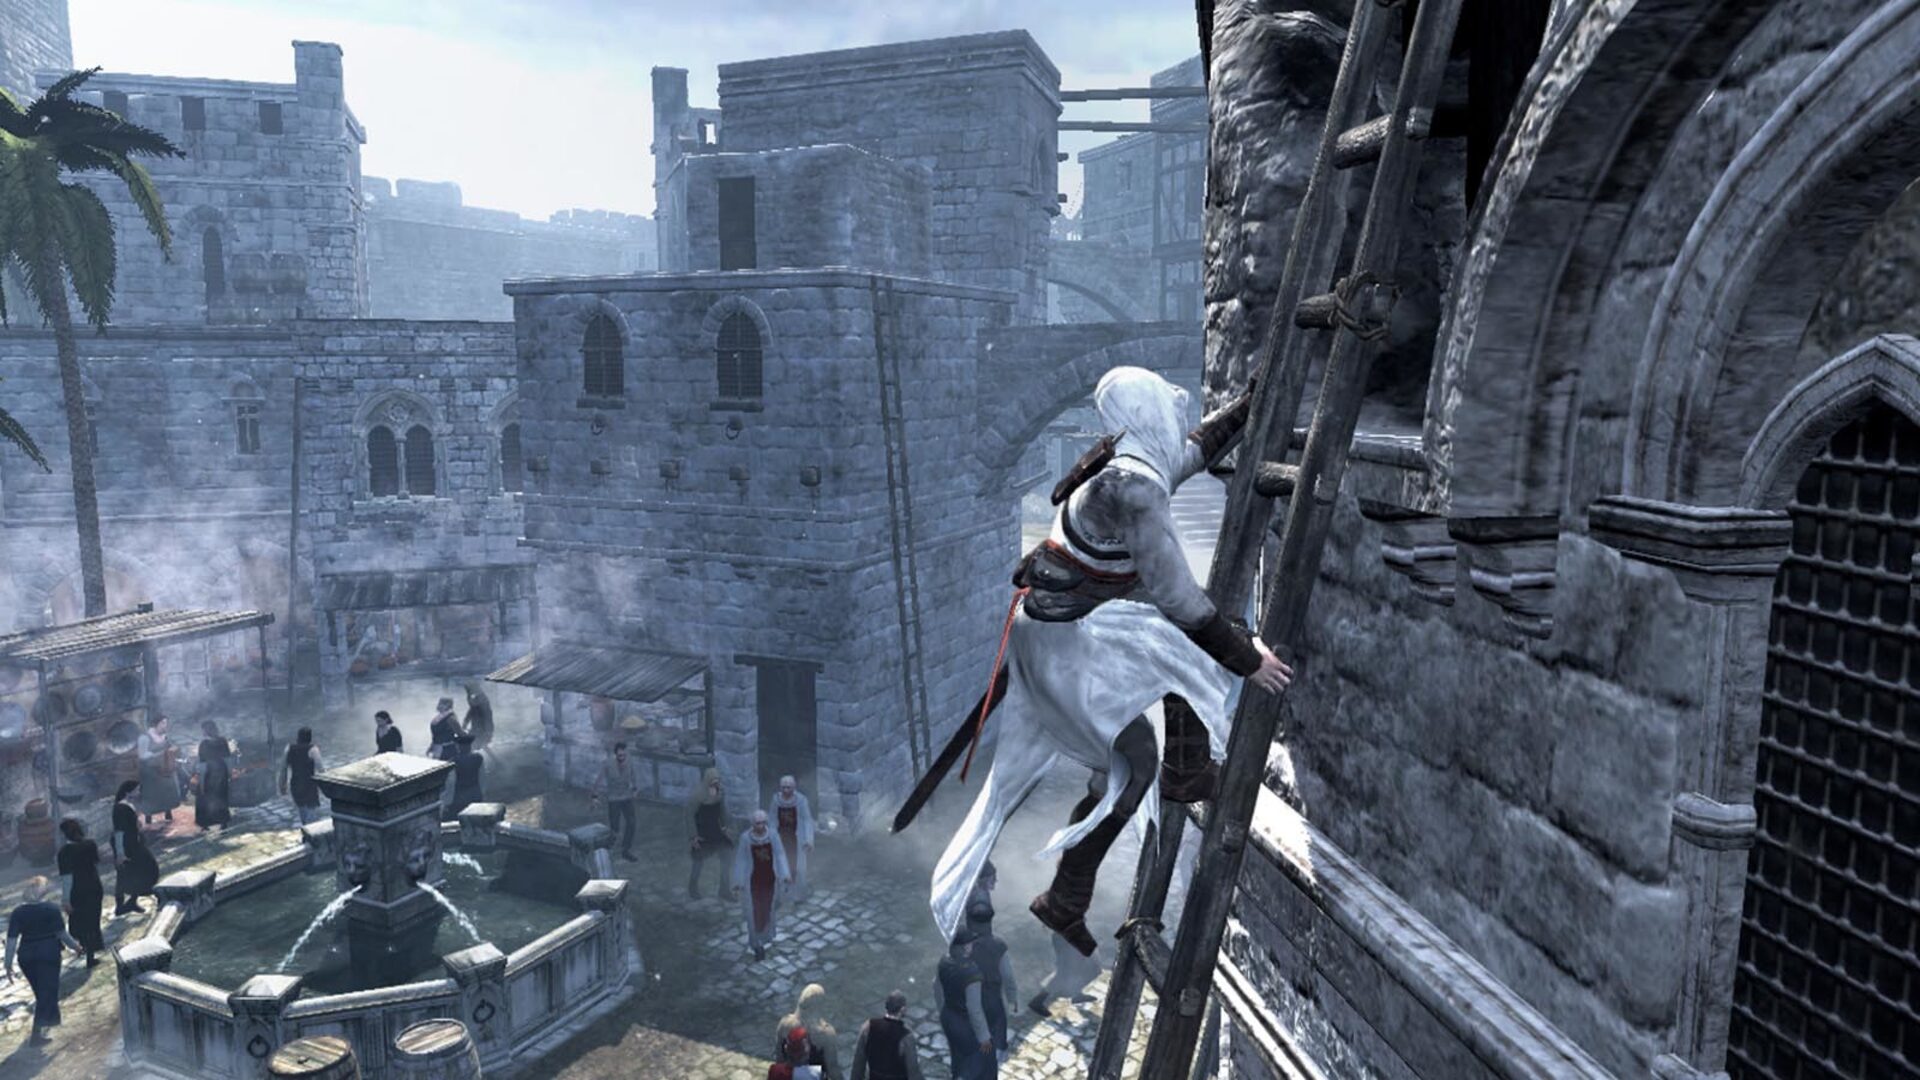 Buy Assassin's Creed: Director's Cut Edition Unisoft Connect Key